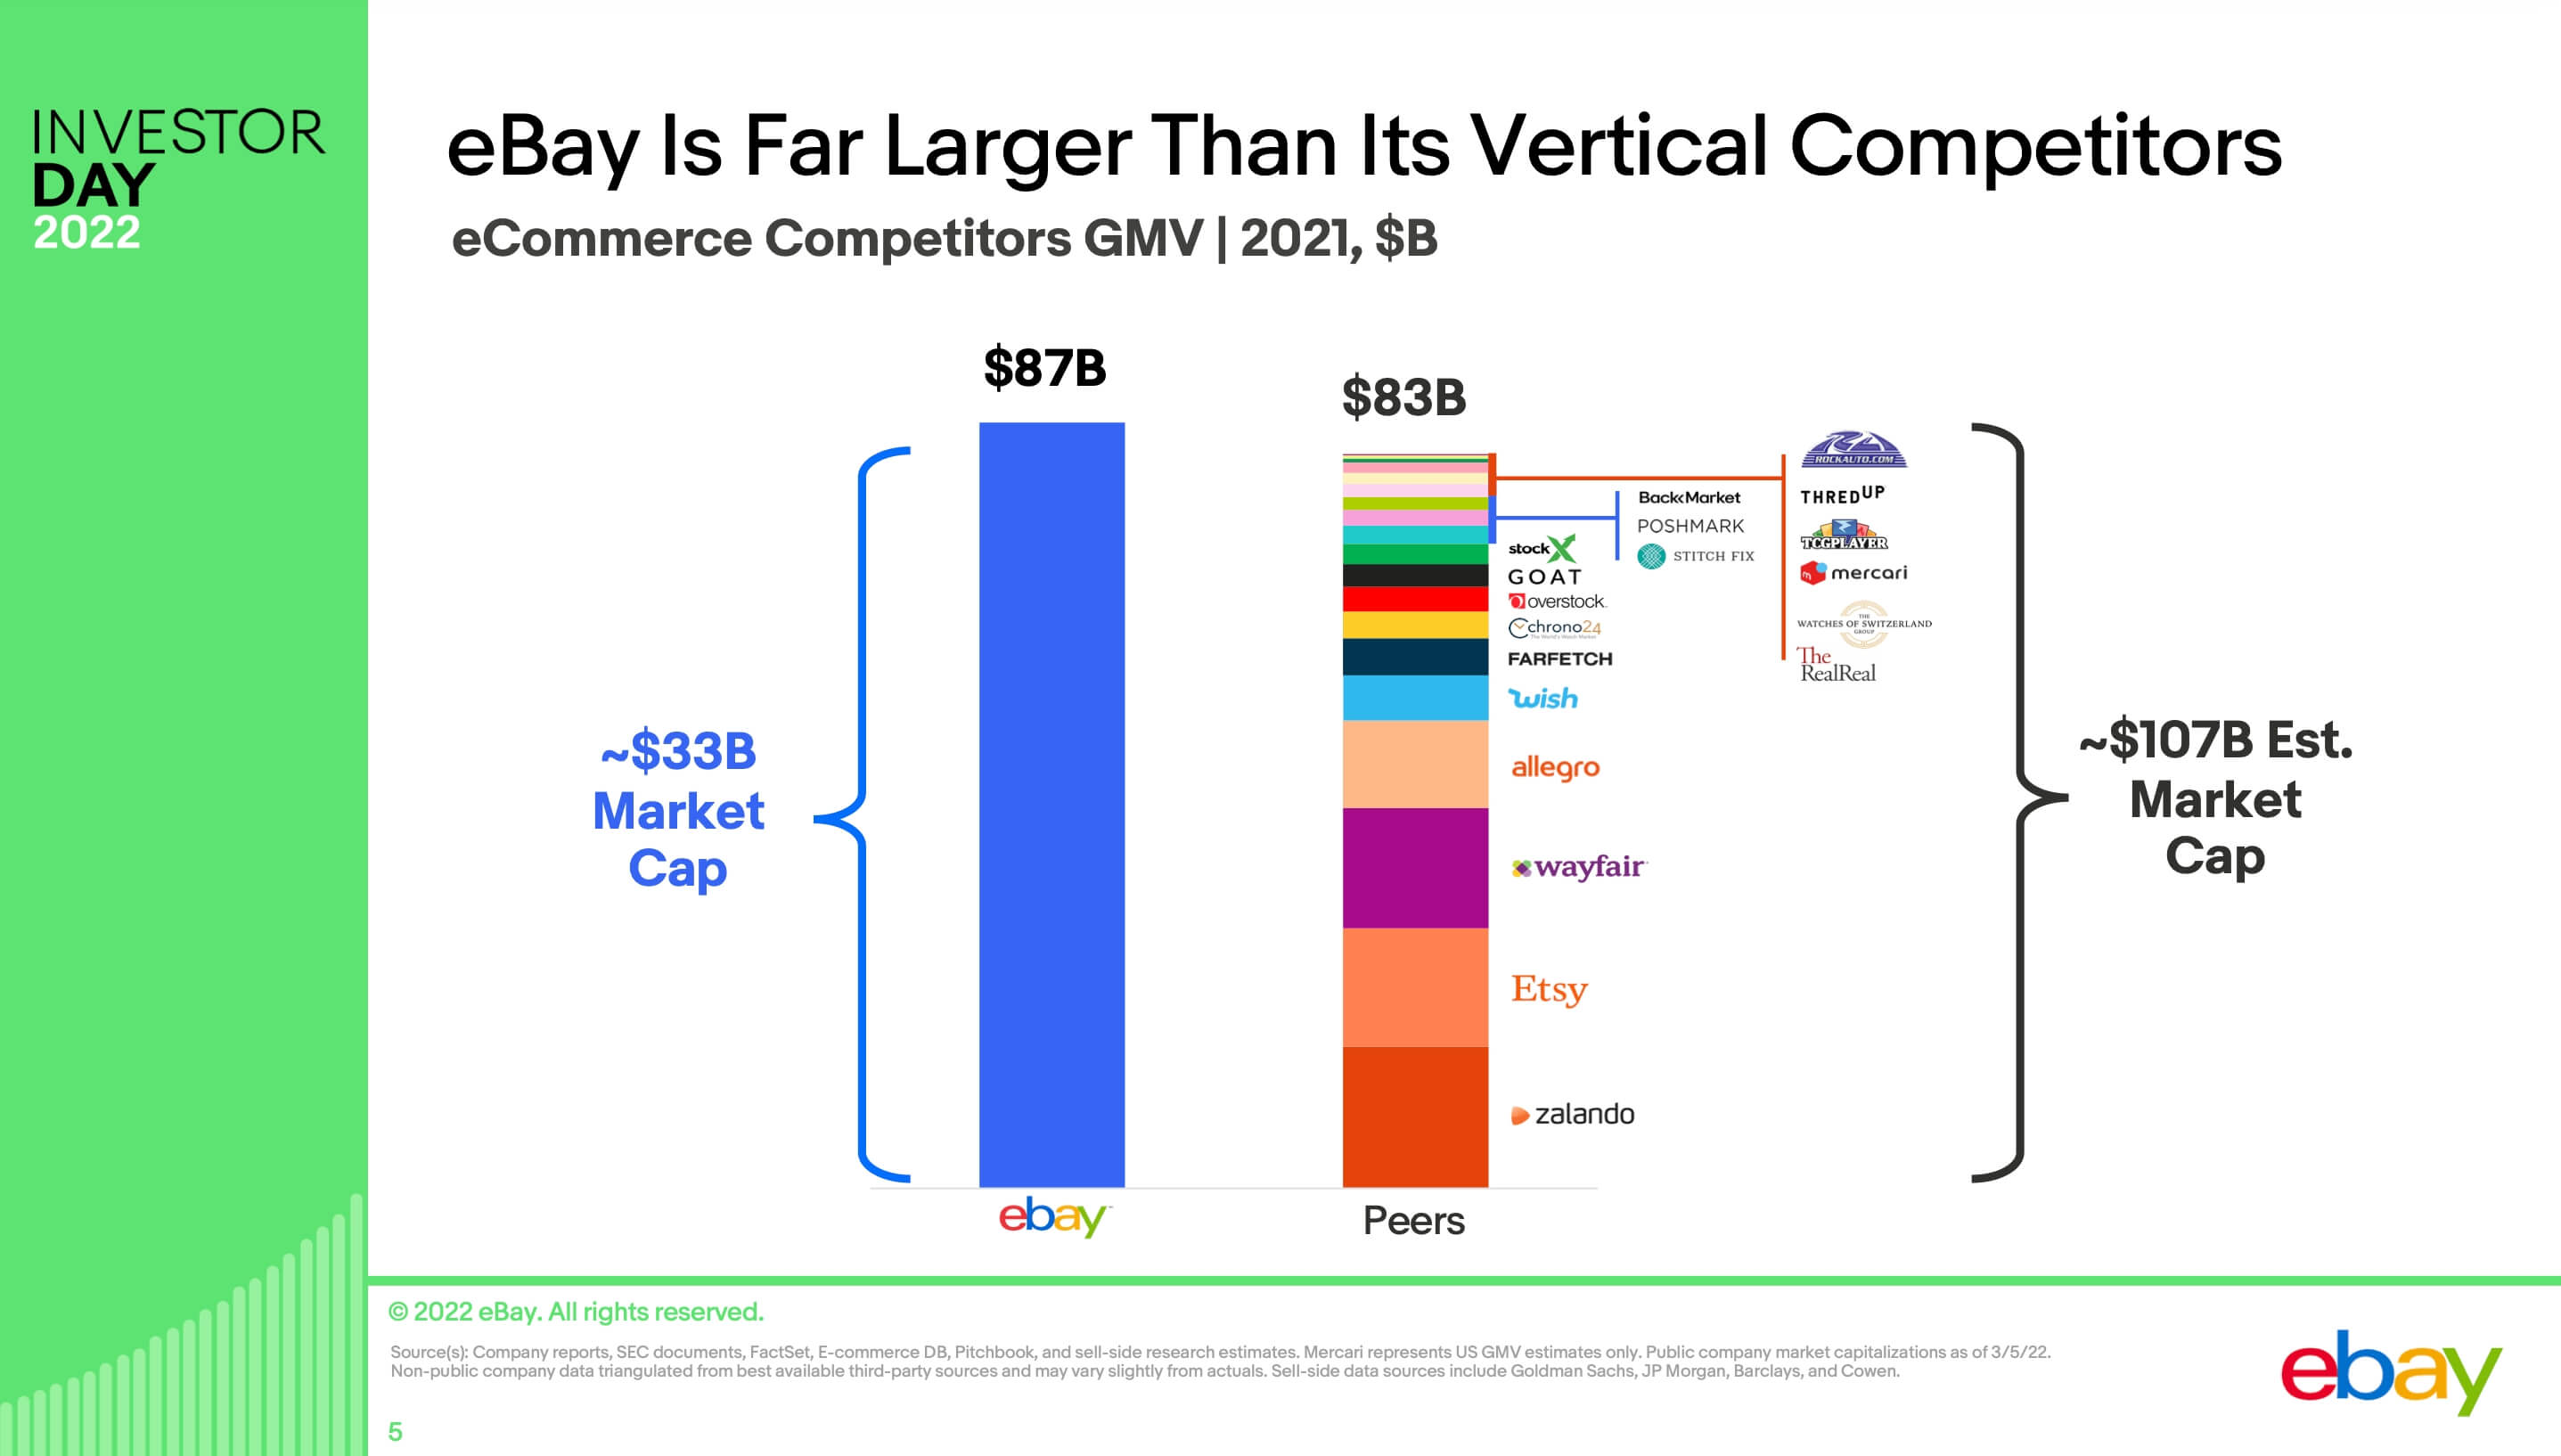 eBay is larger than its verical competitors